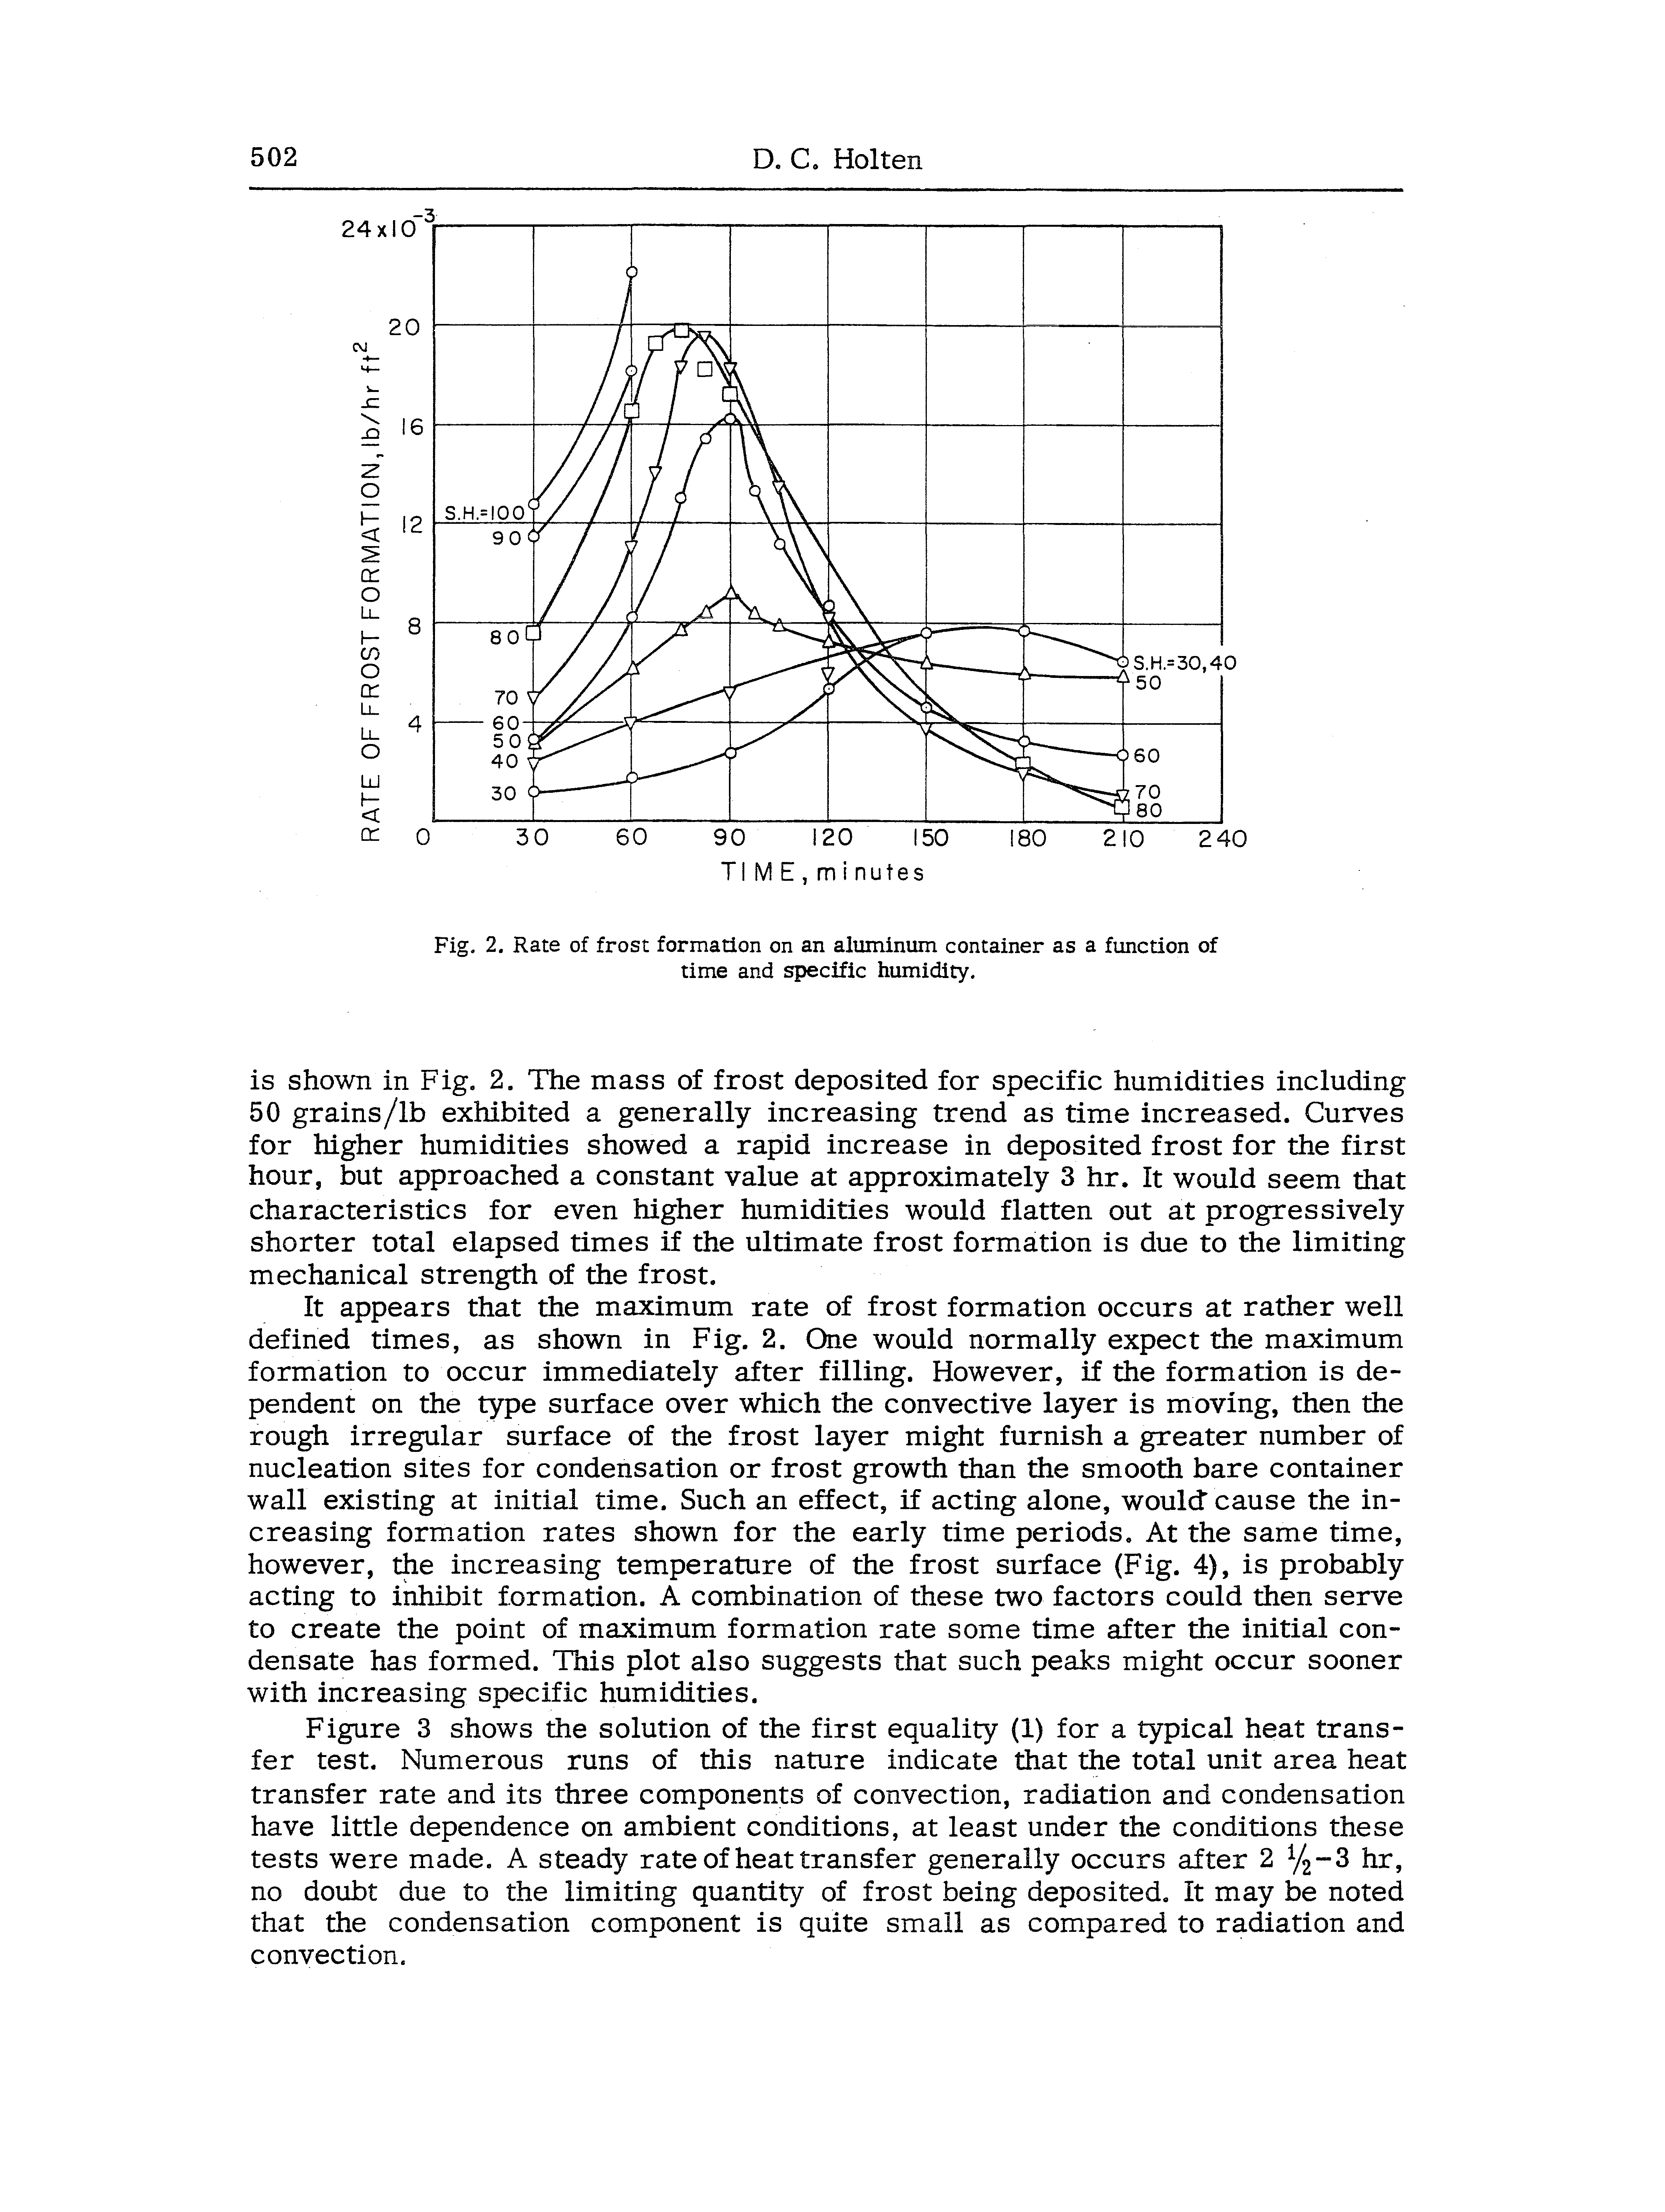 Fig. 2. Rate of frost formation on an aluminum container as a function of time and specific humidity.